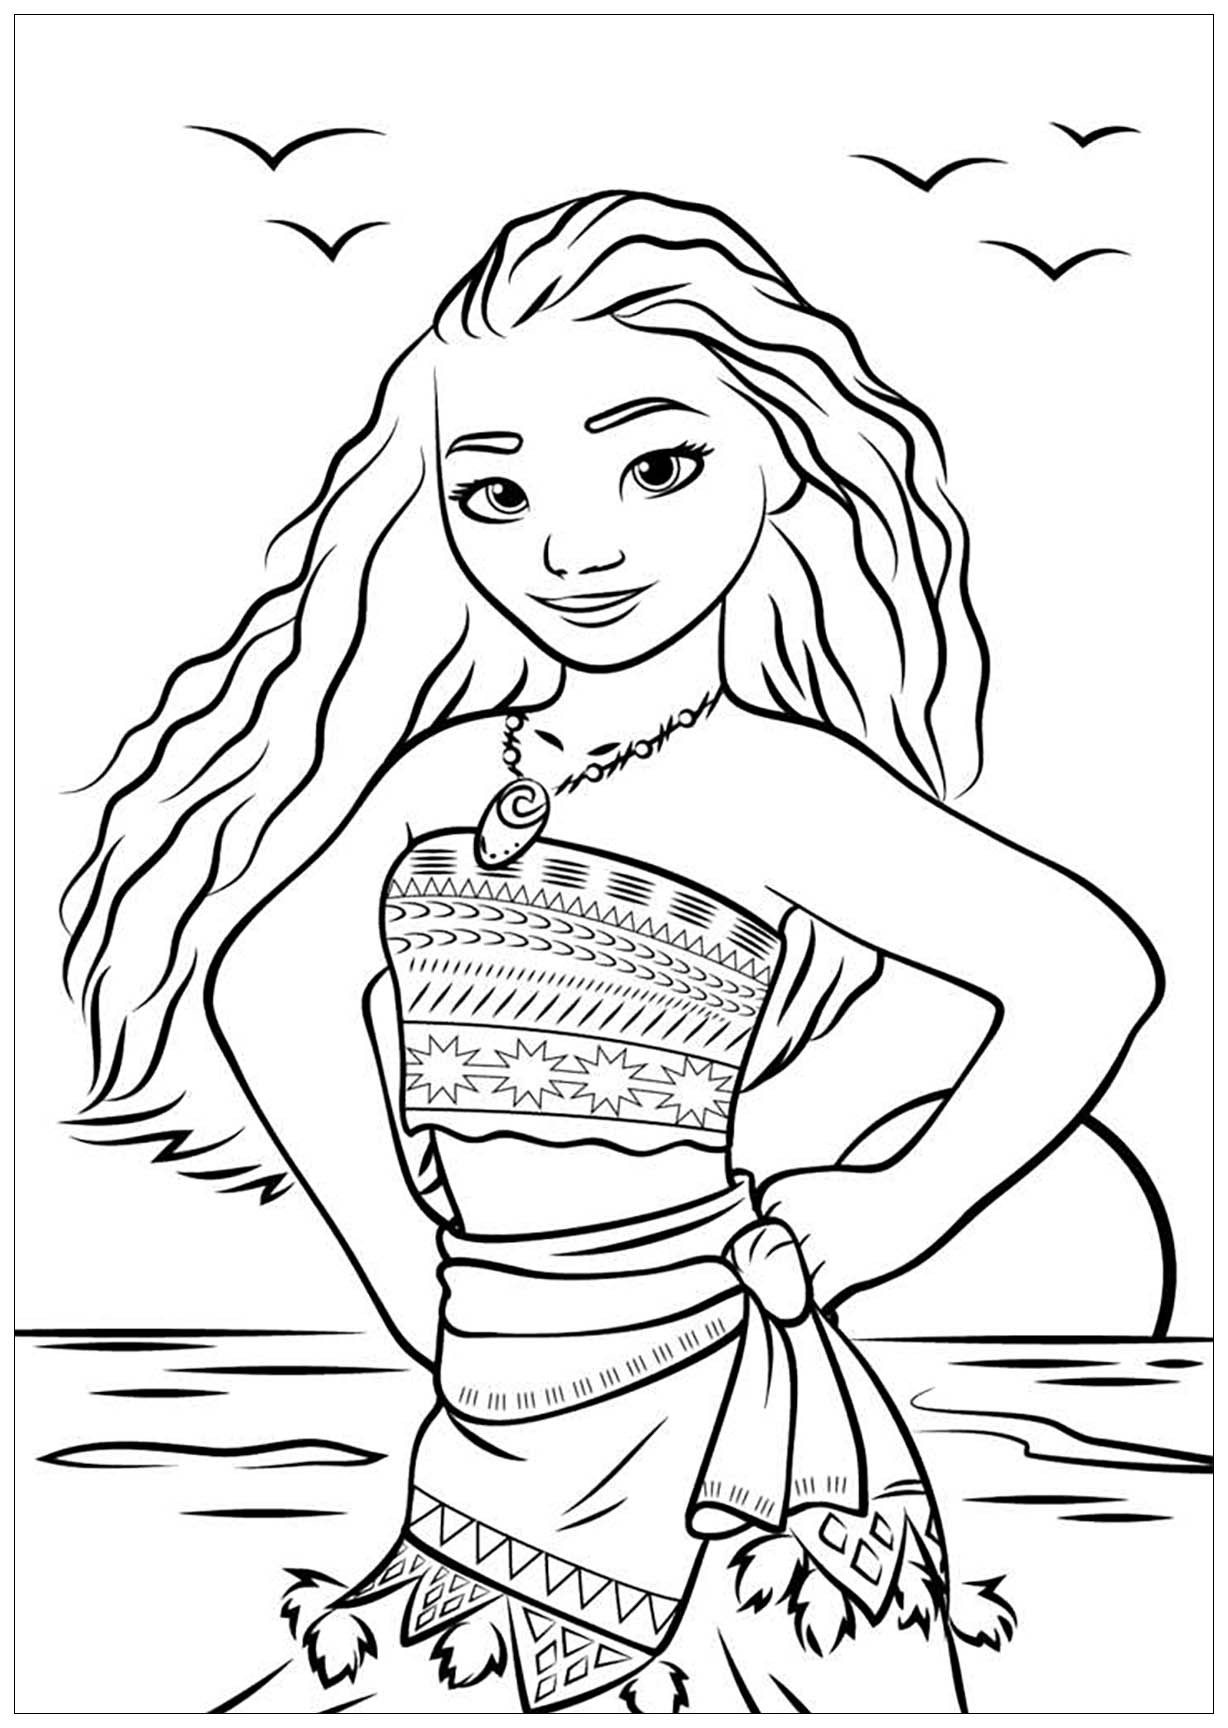 Coloring Pages For Kids Moana
 Moana to print for free Moana Kids Coloring Pages